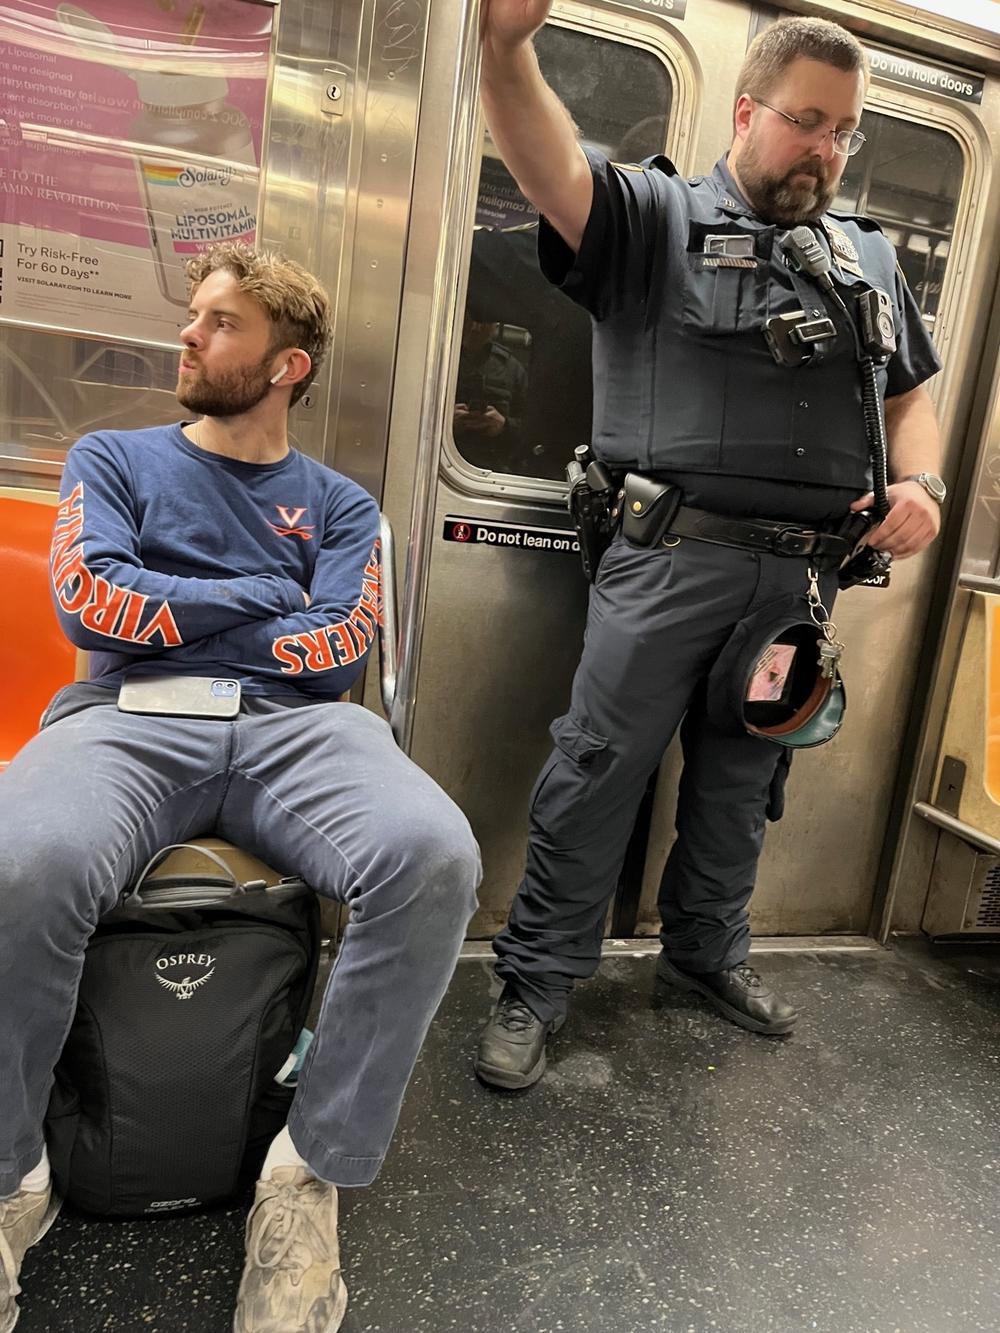 Weeks from midterms election day, New York Gov. Kathy Hochul responded to violent incidents on the subway by increasing the number of officers patrolling the system.